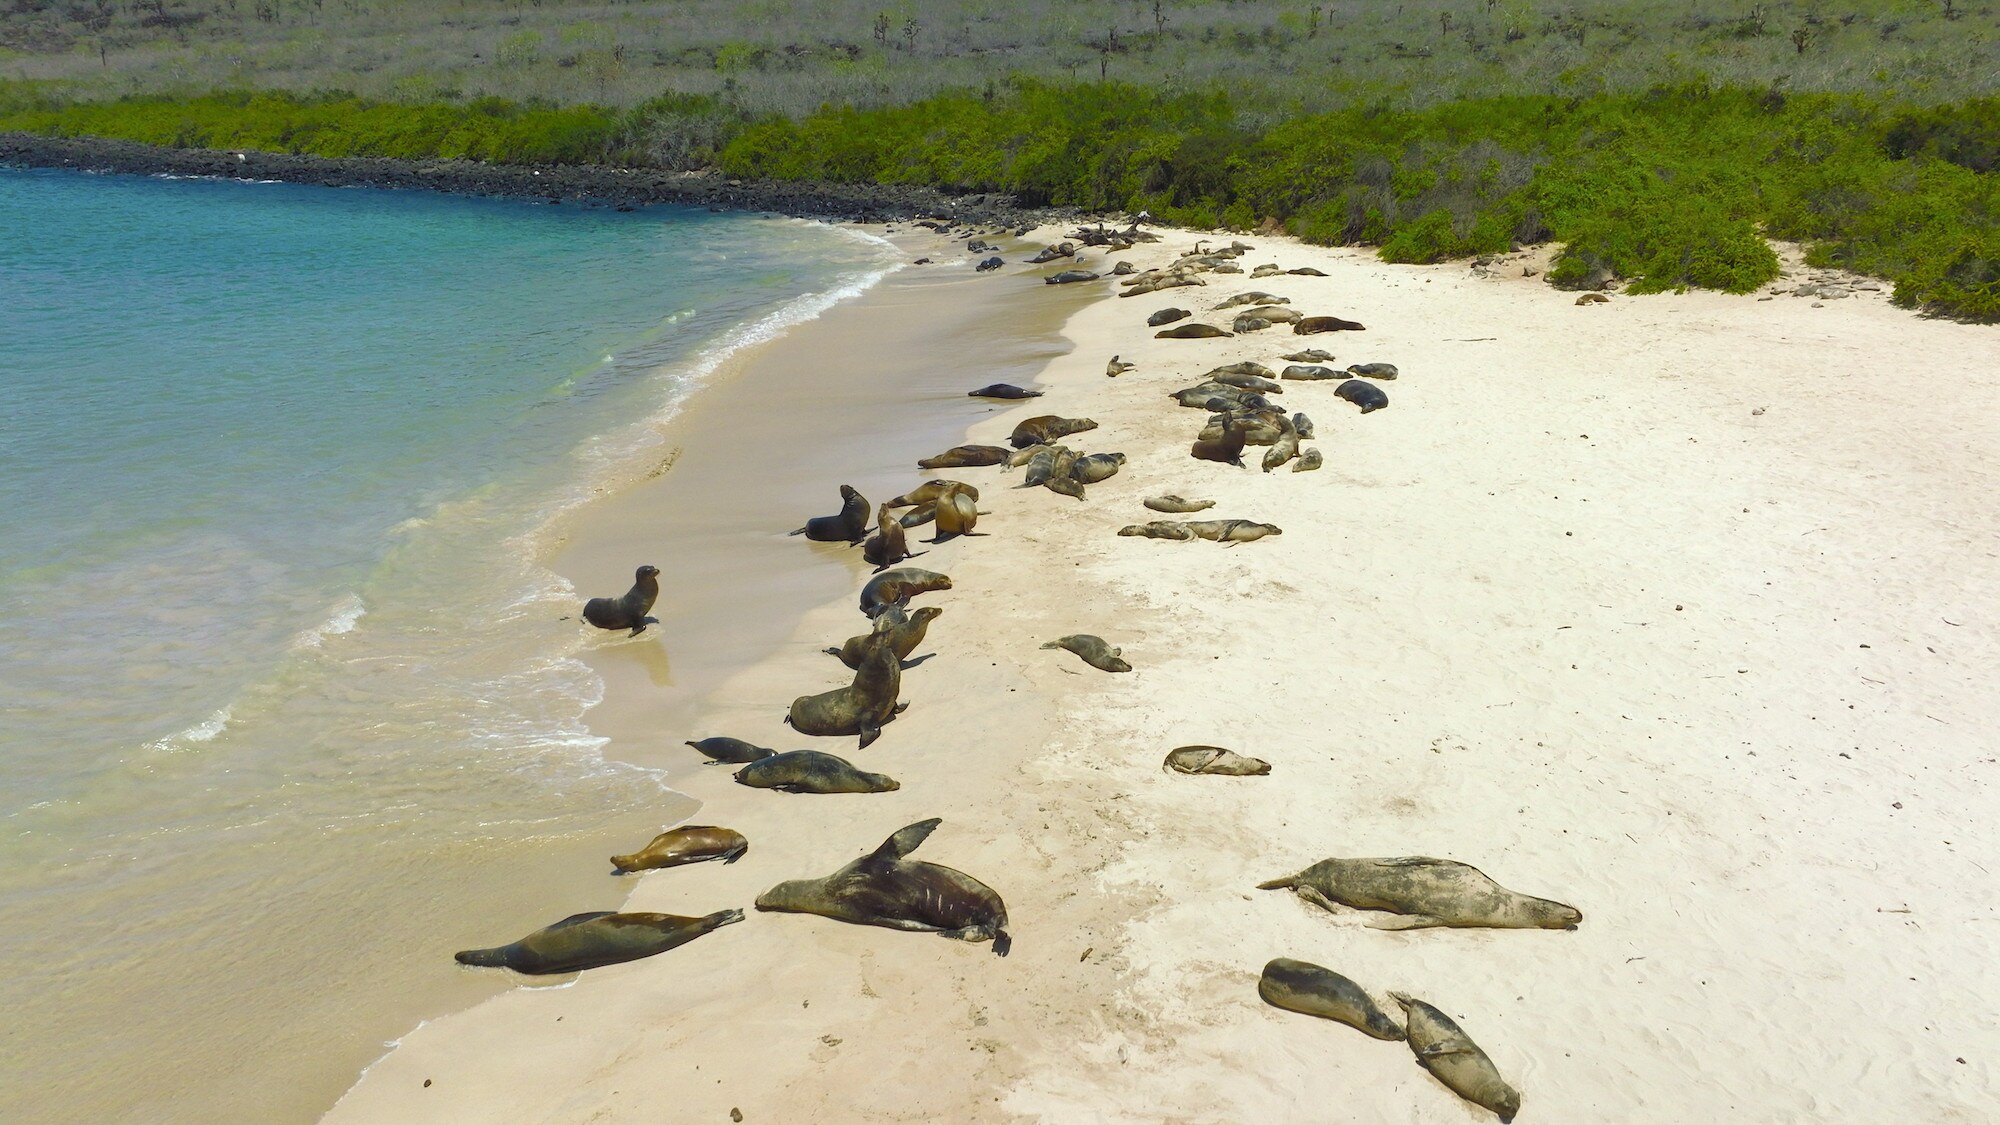 Group of sea lions sunbathing on a sandy beach. (National Geographic for Disney+/Jeff Hester)